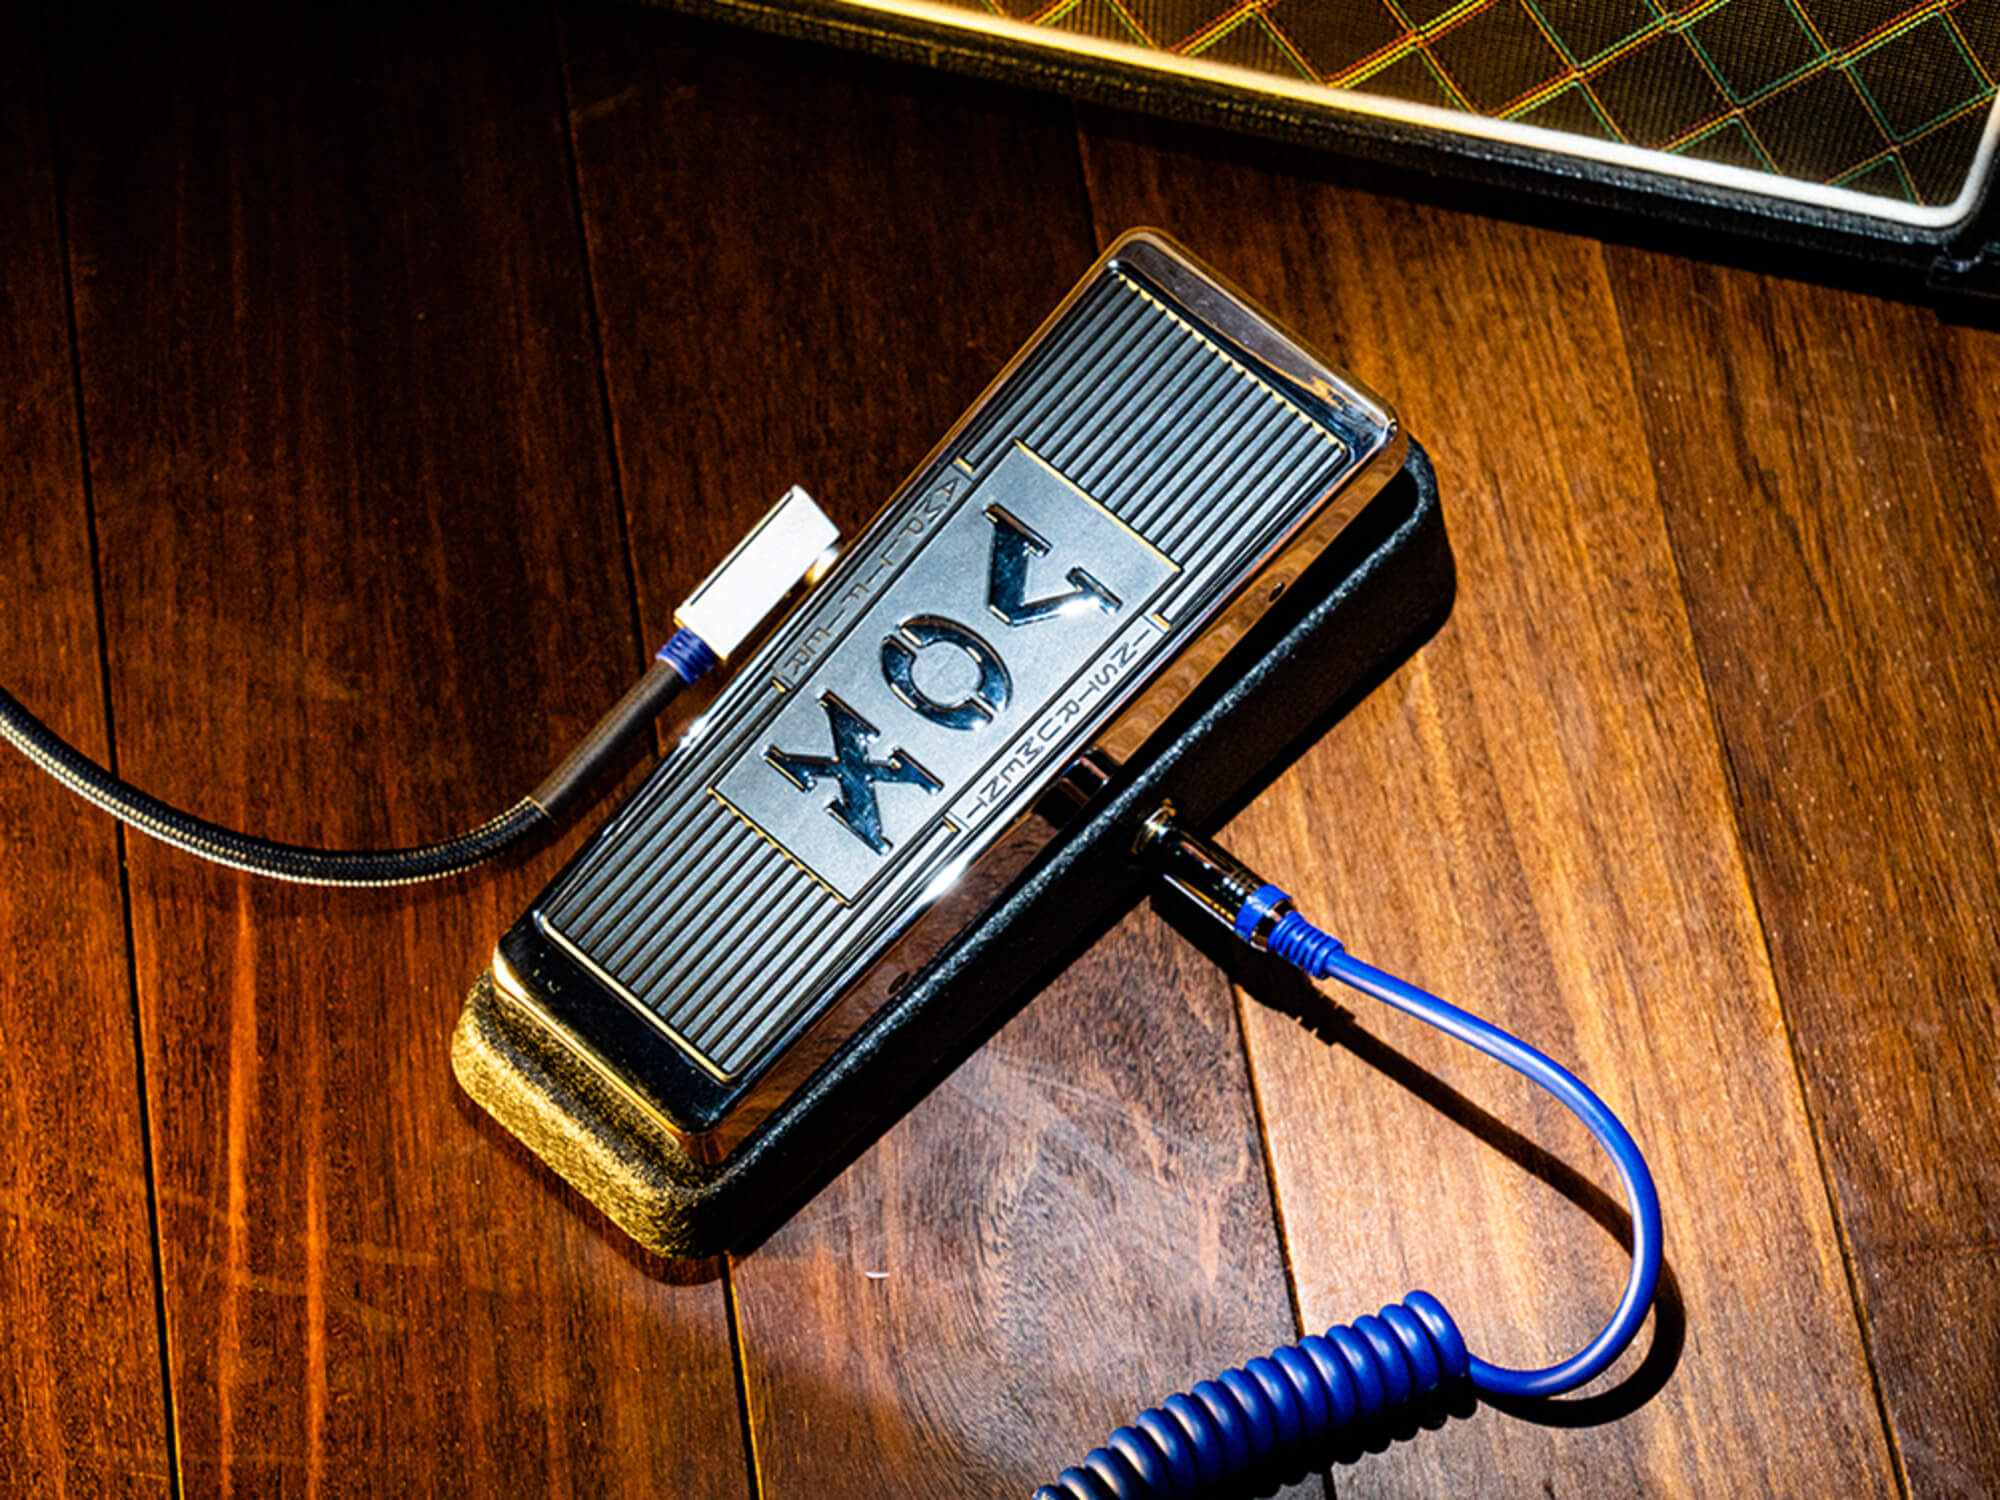 Vox recreations of first-ever wah pedals